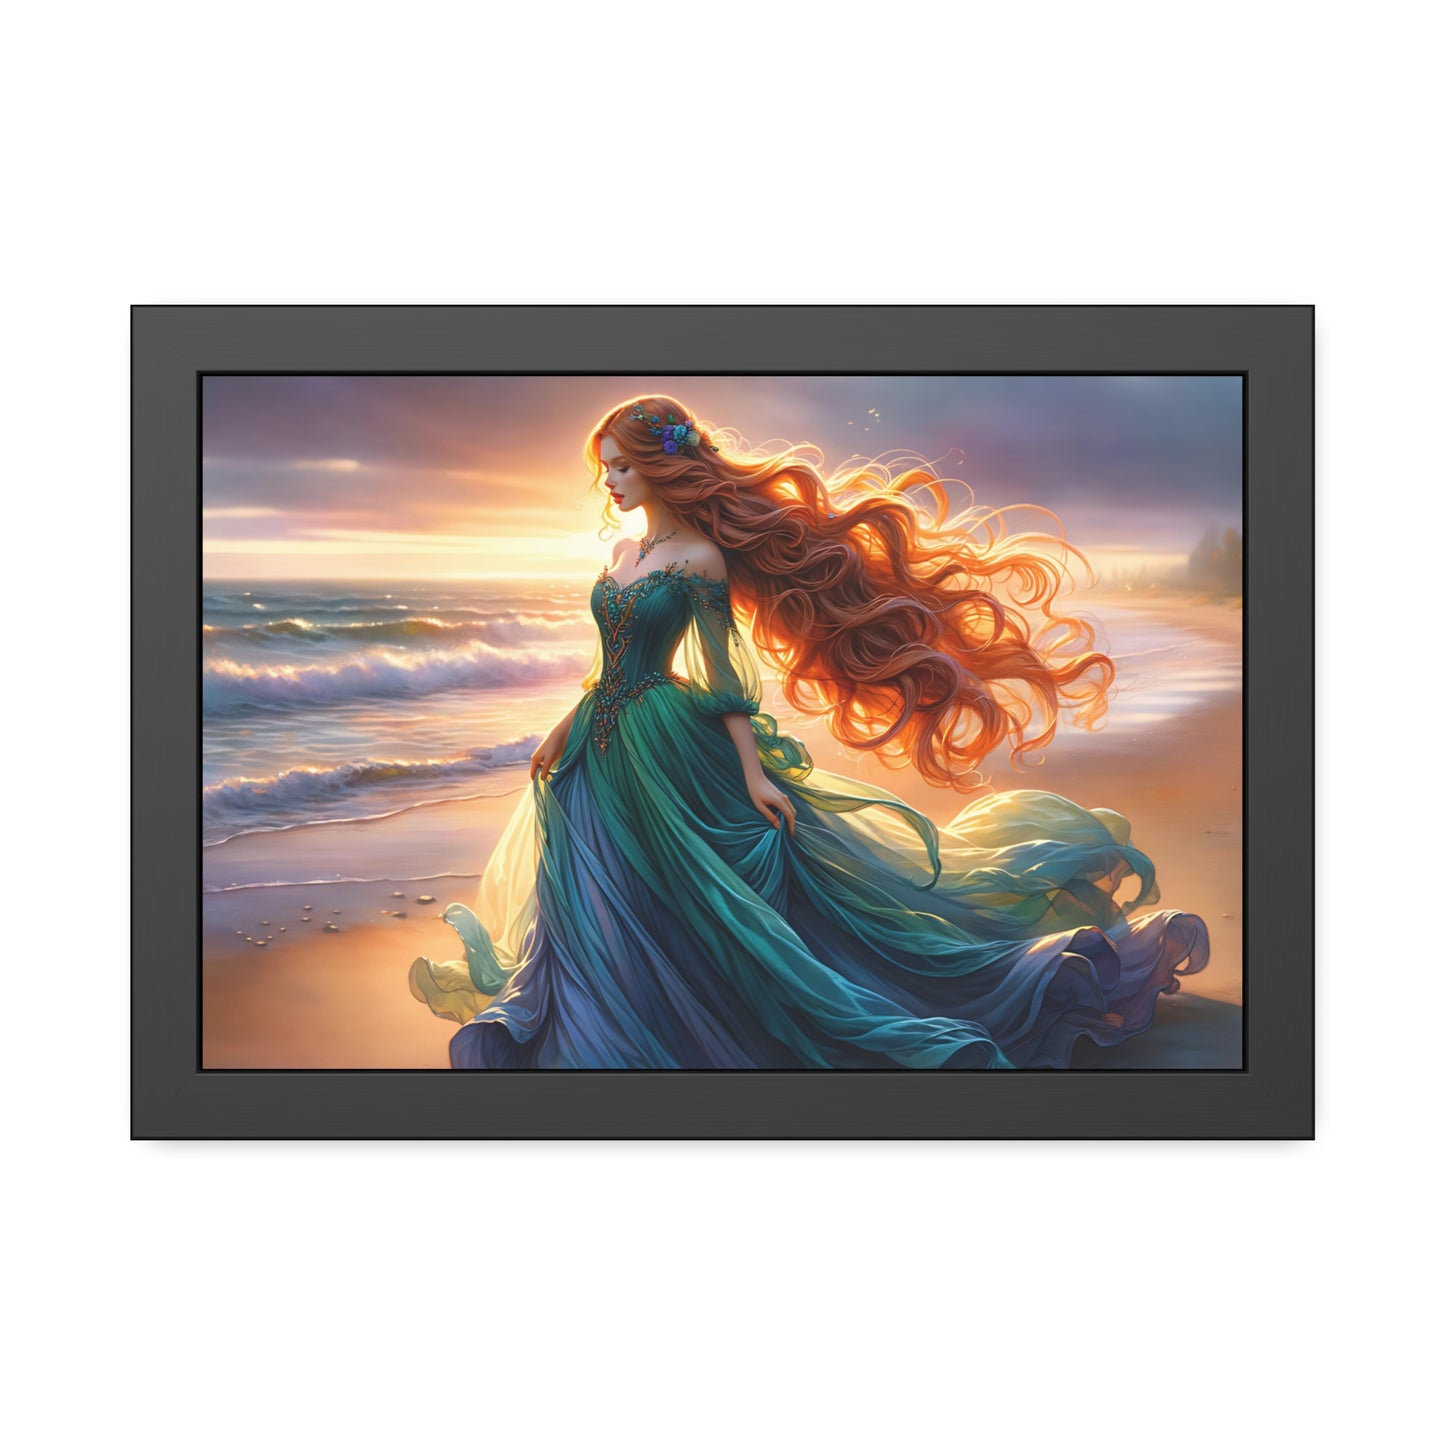 Once Upon A Fantasy - On The Shore Framed Posters